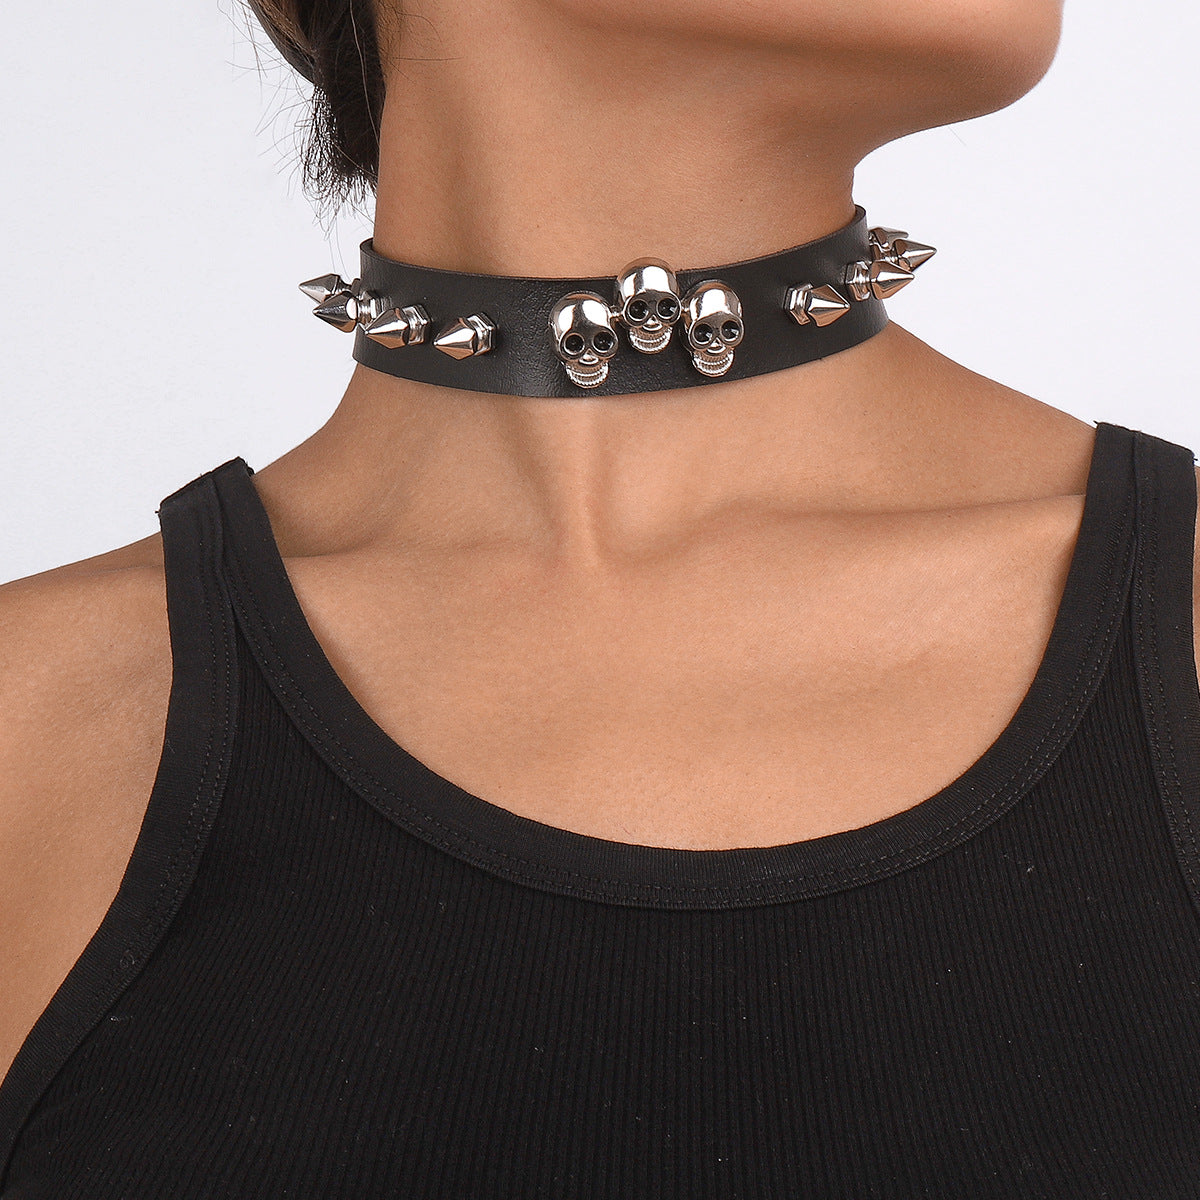 A woman wearing a Gothic Rivet Necklace with skulls and spikes by Maramalive™.